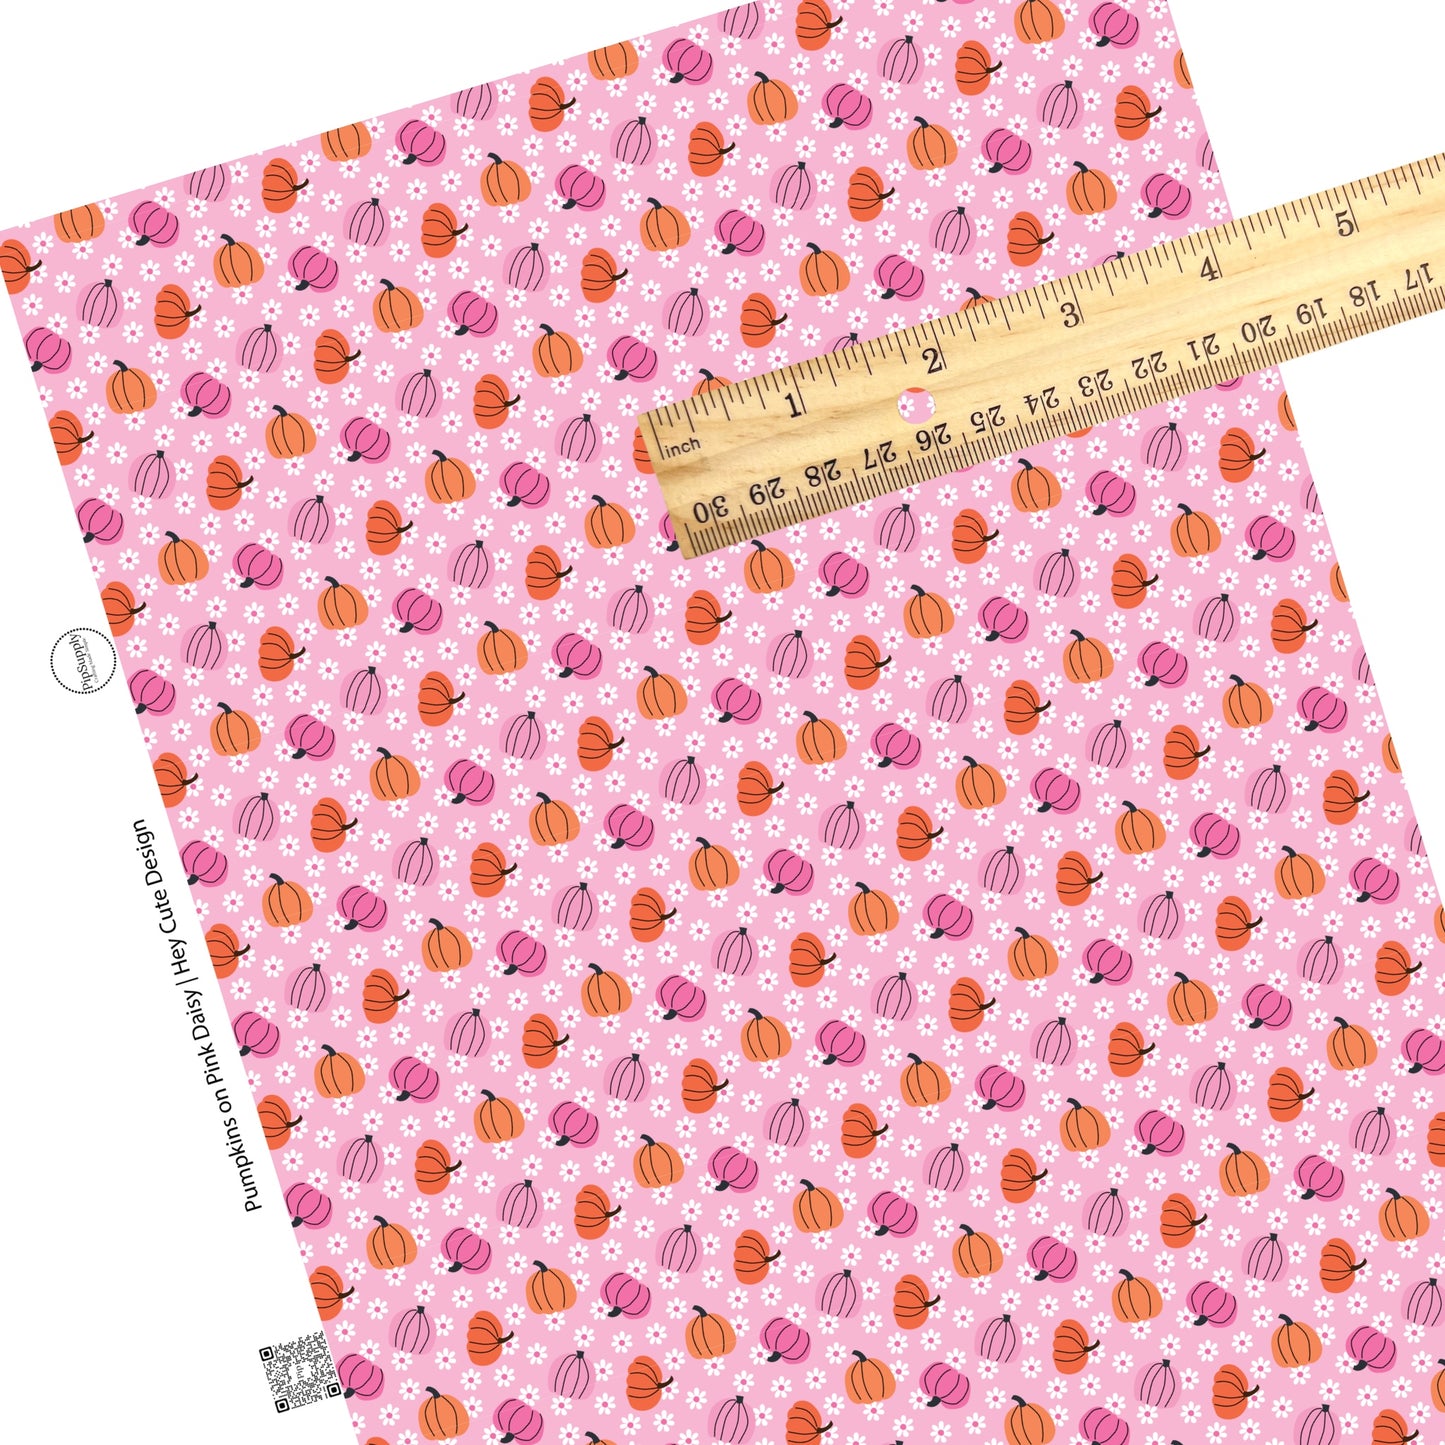 These Halloween themed pink faux leather sheets contain the following design elements: orange and pink pumpkins surrounded by tiny white daisies on pink. Our CPSIA compliant faux leather sheets or rolls can be used for all types of crafting projects.